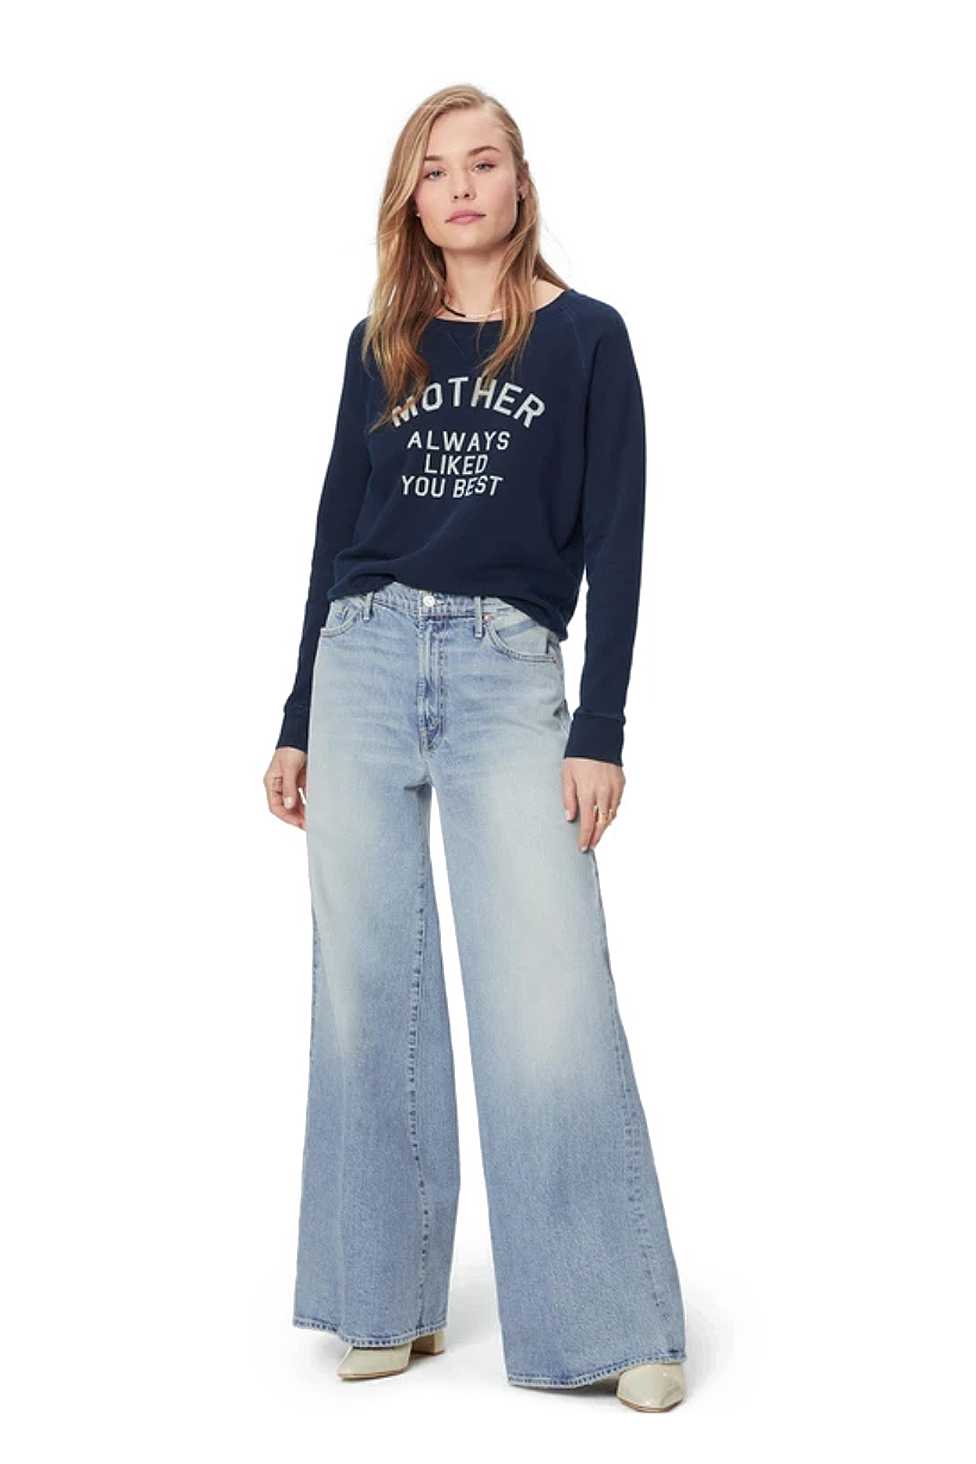 jean trends for 2019